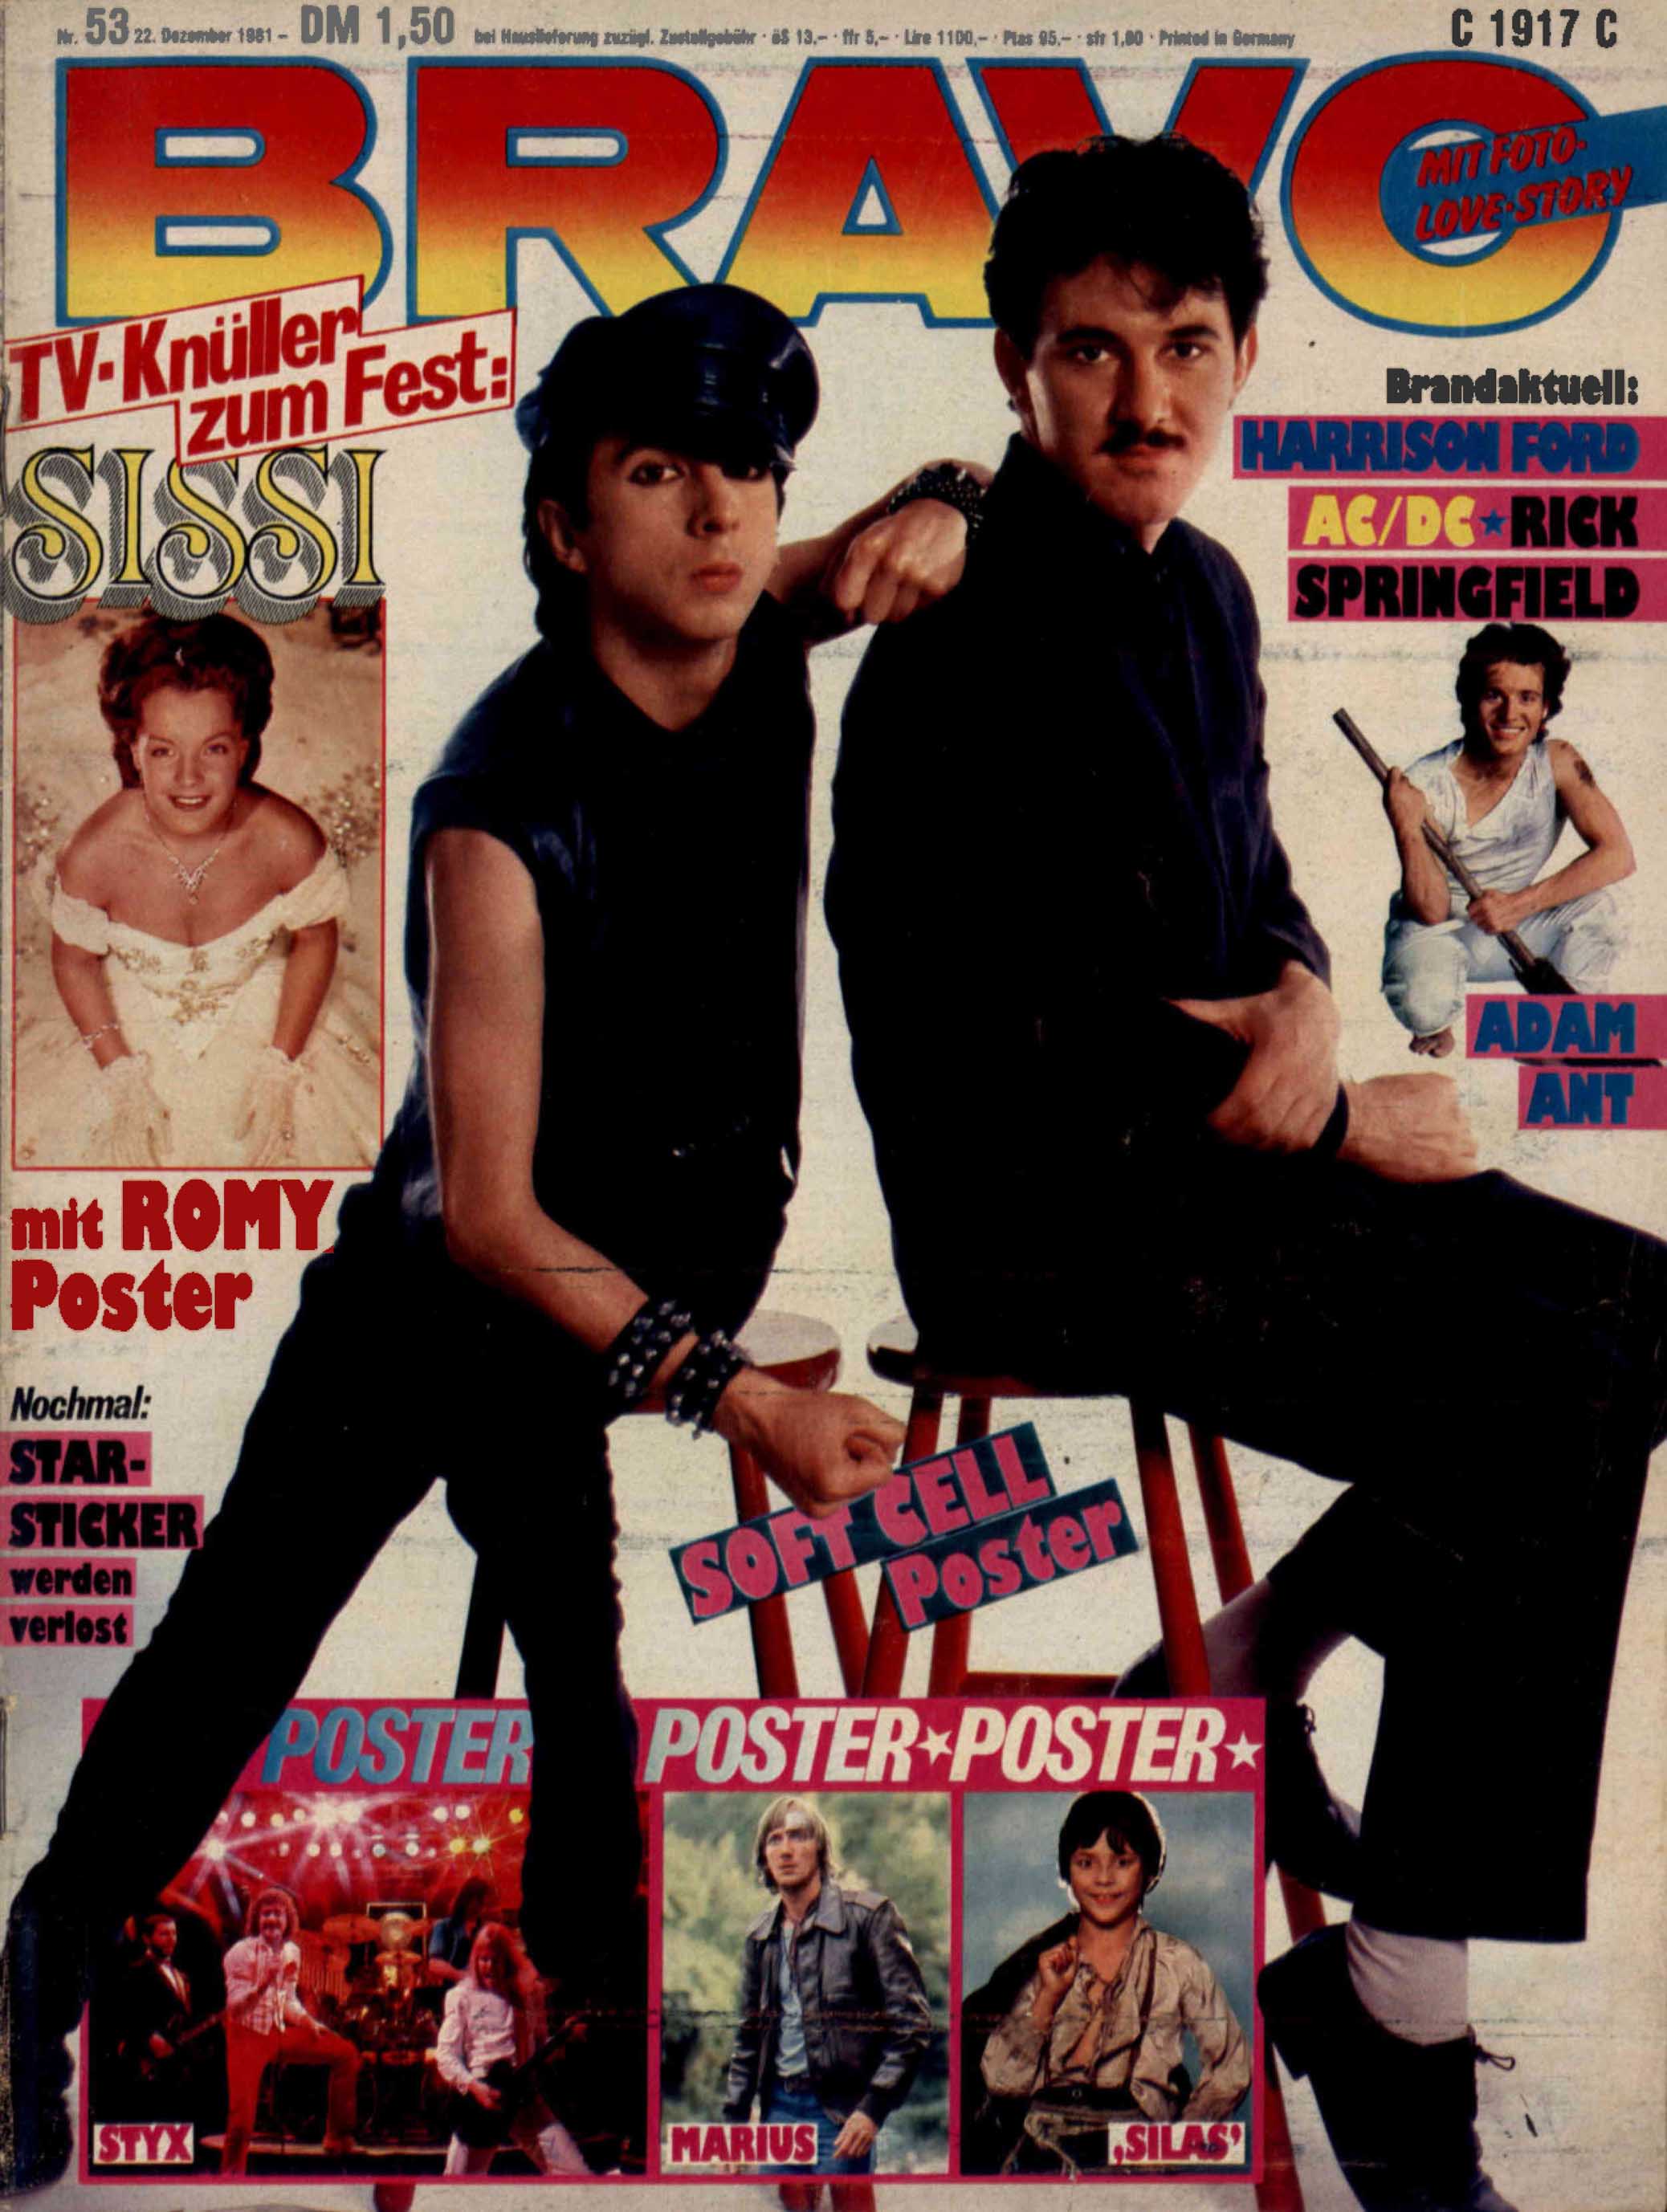 soft cell albums